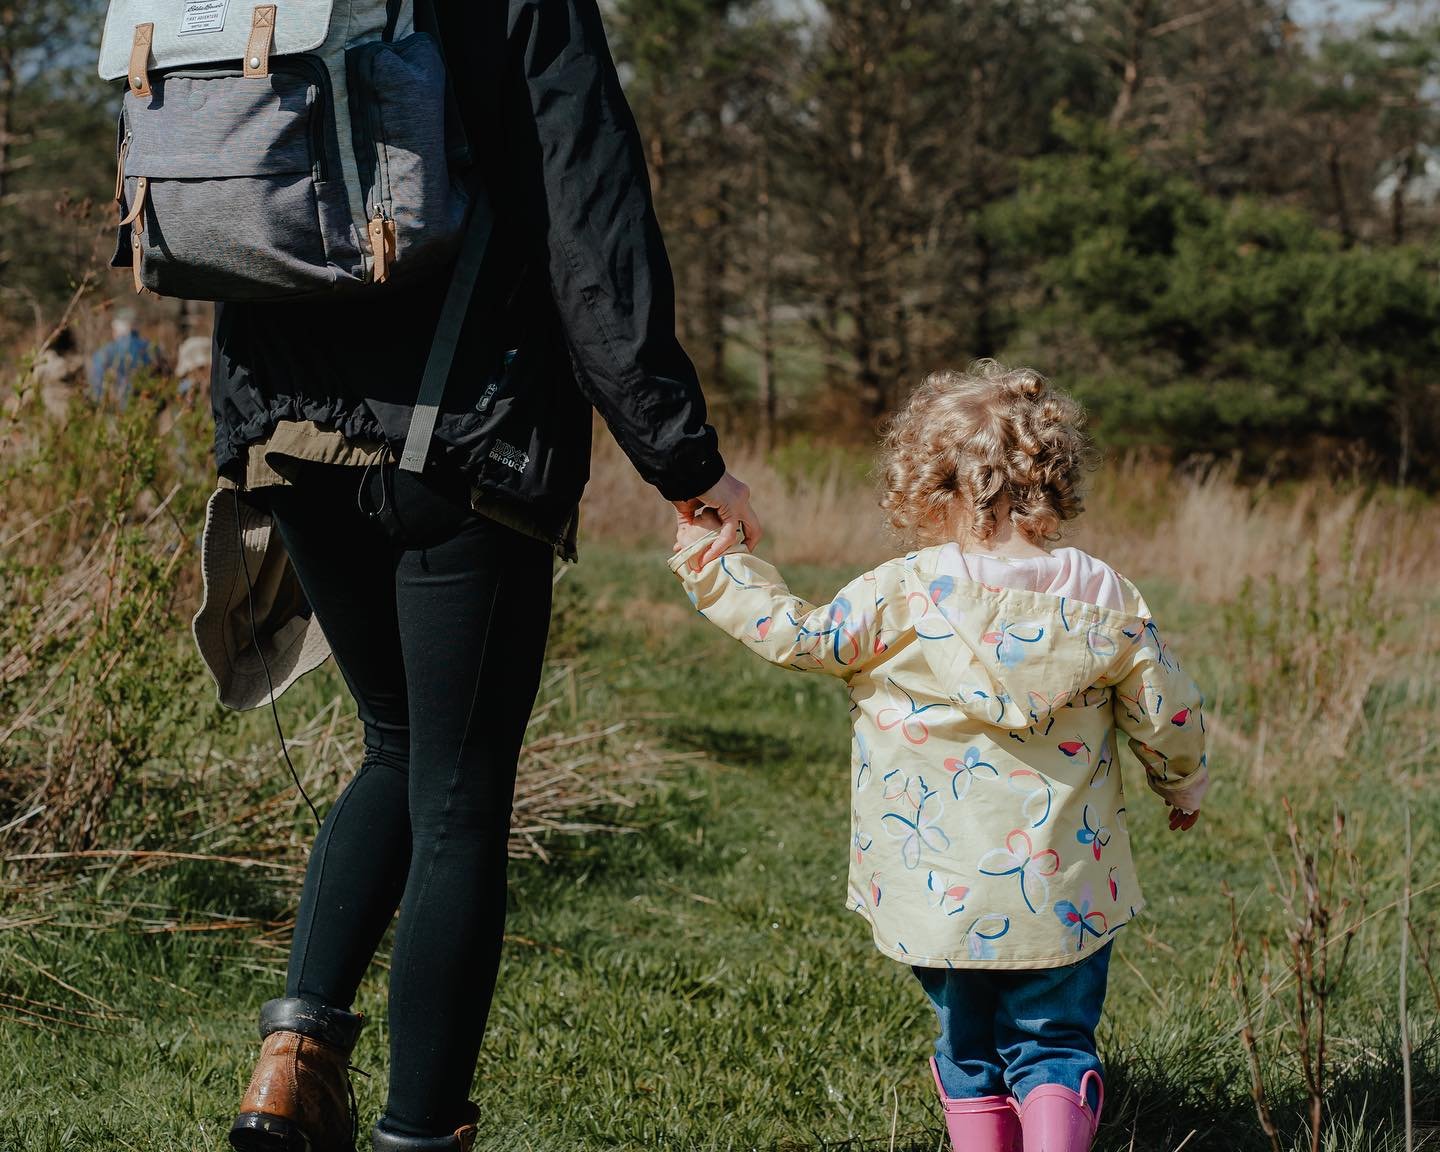 Enjoy a weekend of exploring, hiking, eating and shopping in Livingston Manor! Perfect for dog-mama&rsquo;s, families and groups wanting a casual and relaxed atmosphere.  We have rooms still available for Mother&rsquo;s Day weekend (5/10-5/12) with s